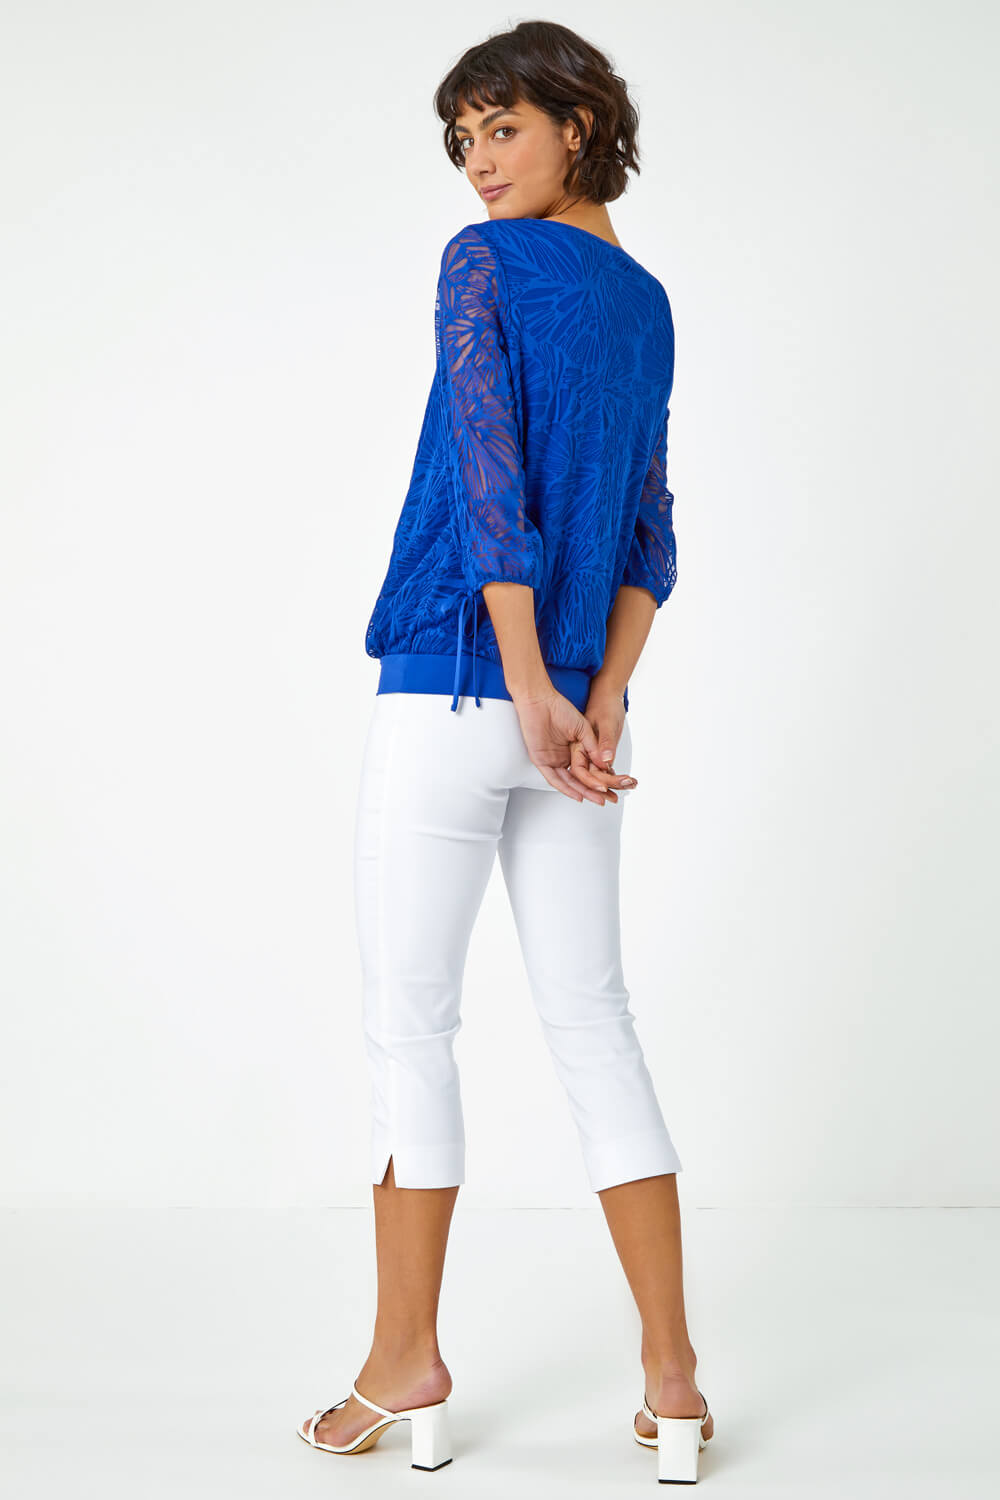 Royal Blue Burnout Tie Sleeve Overlay Top, Image 3 of 5